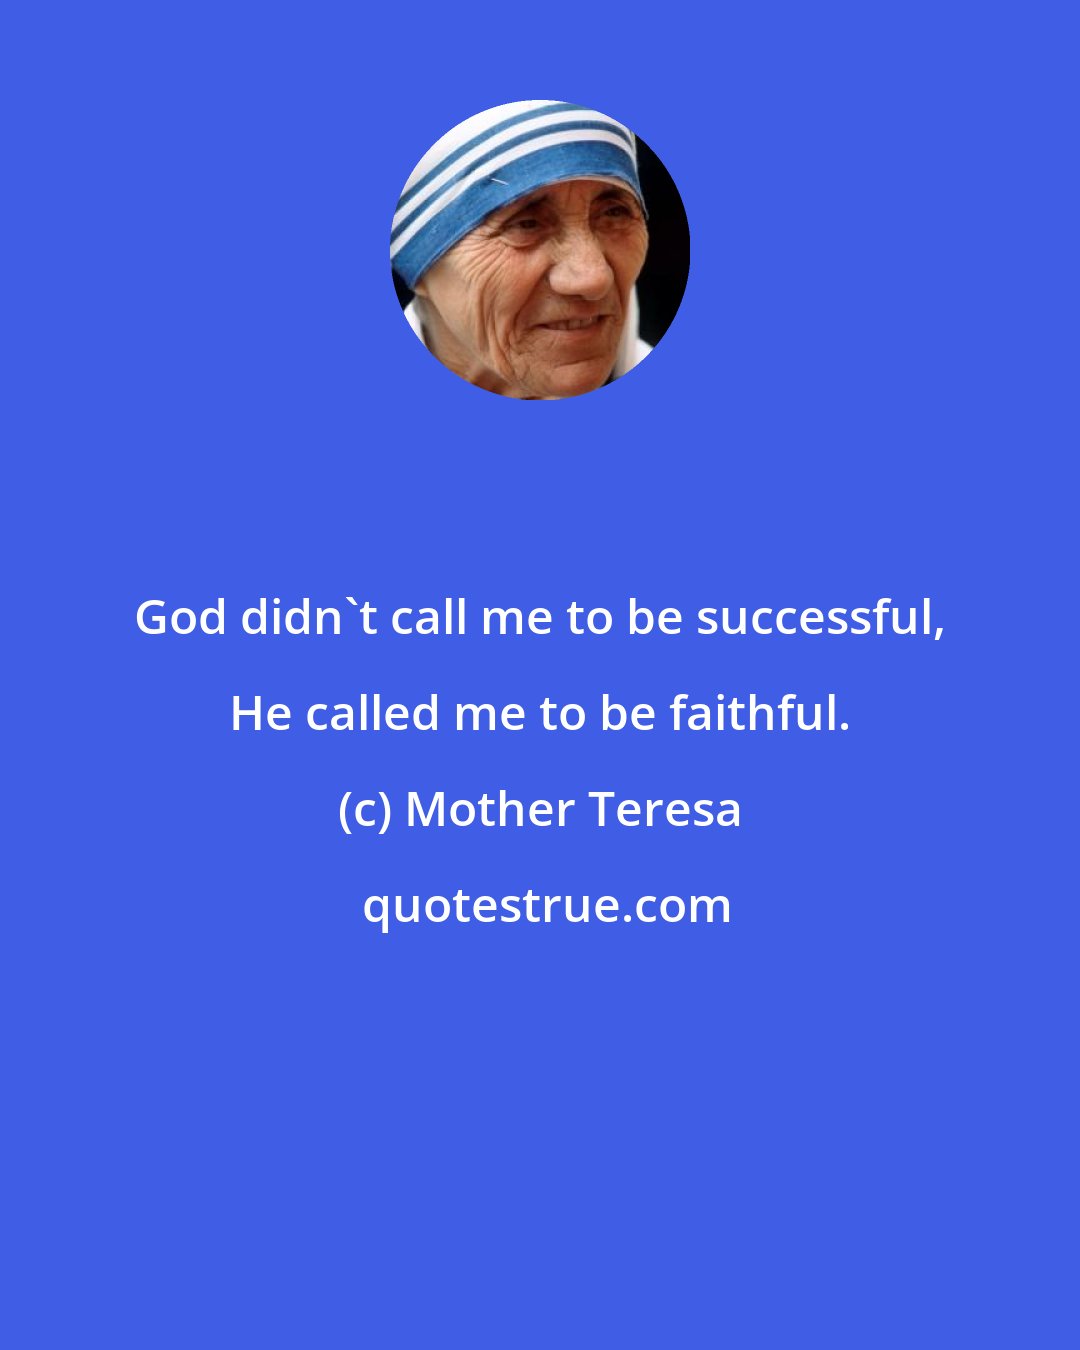 Mother Teresa: God didn't call me to be successful, He called me to be faithful.